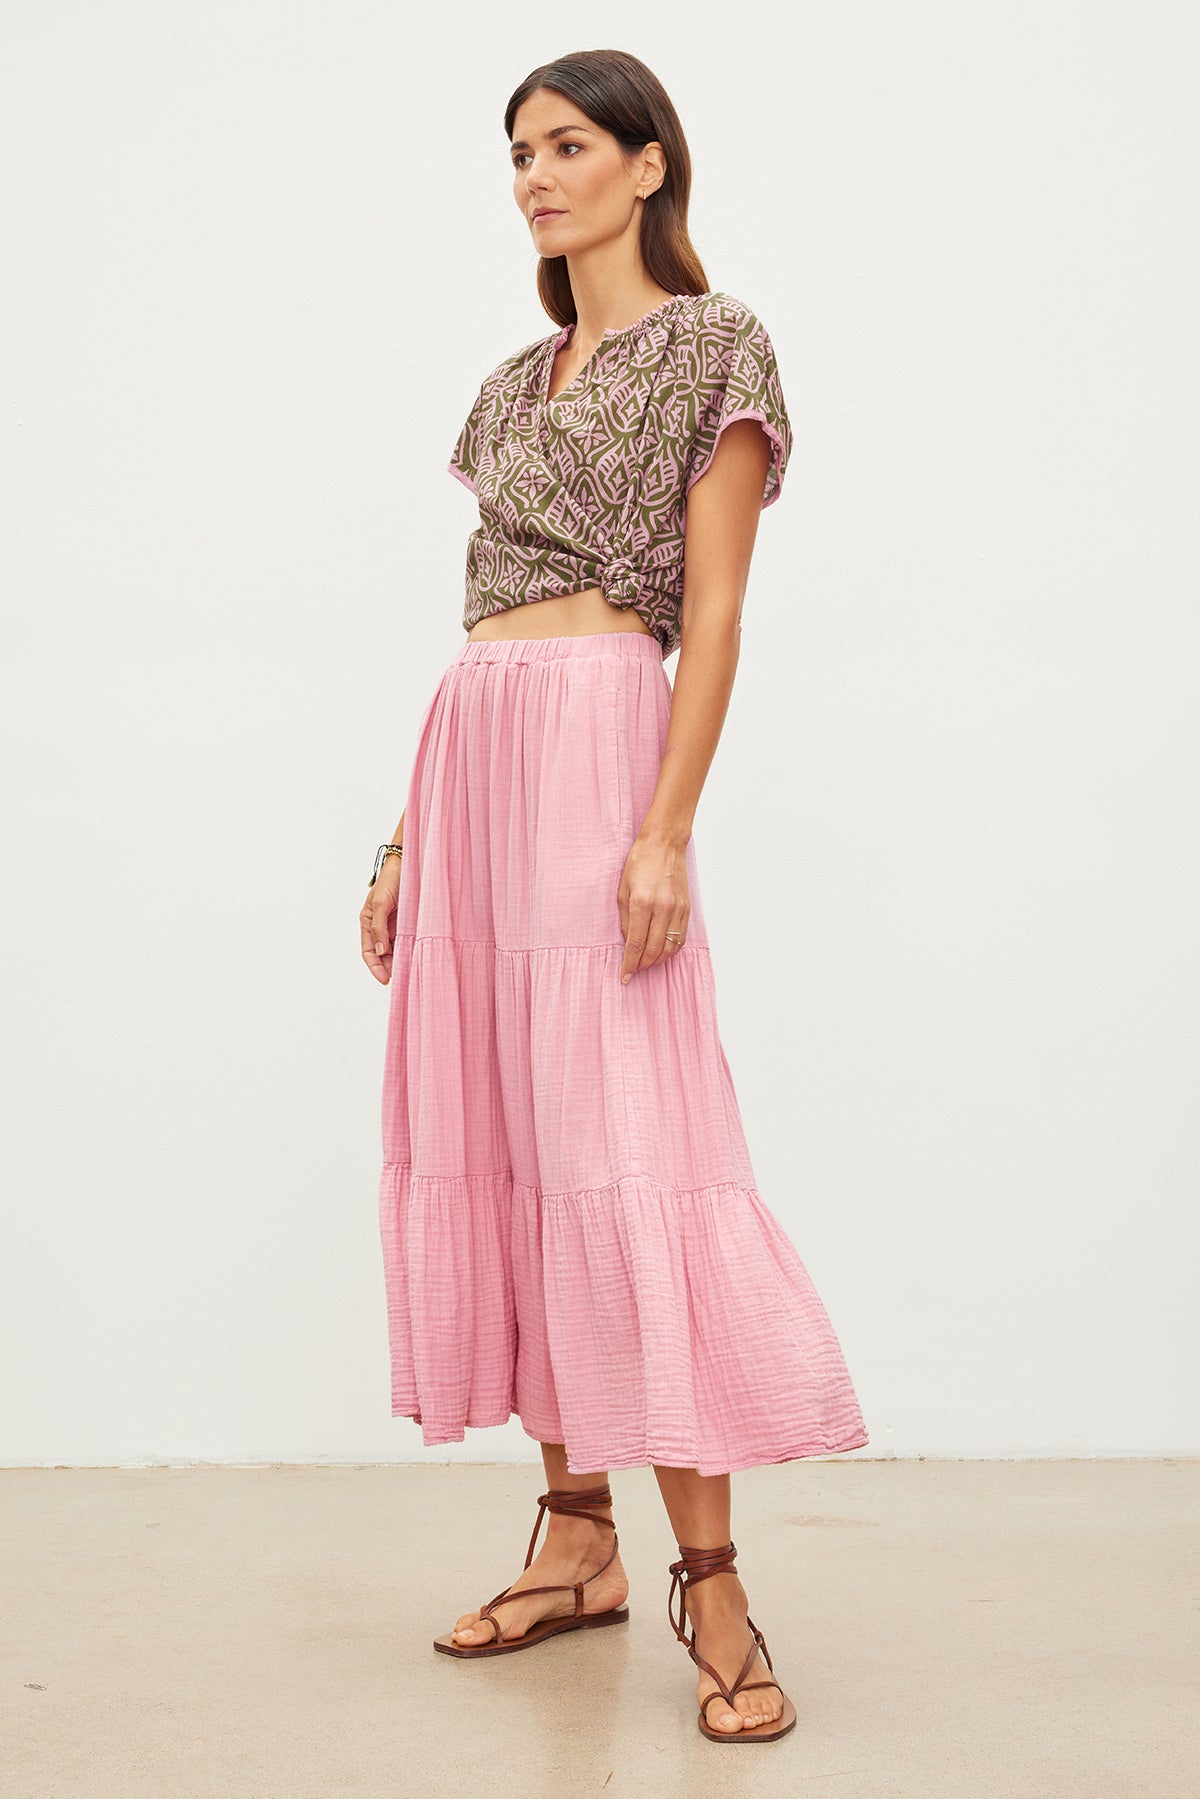 The model is wearing a Velvet by Graham & Spencer pink midi skirt with ruffle detail.-35967654363329